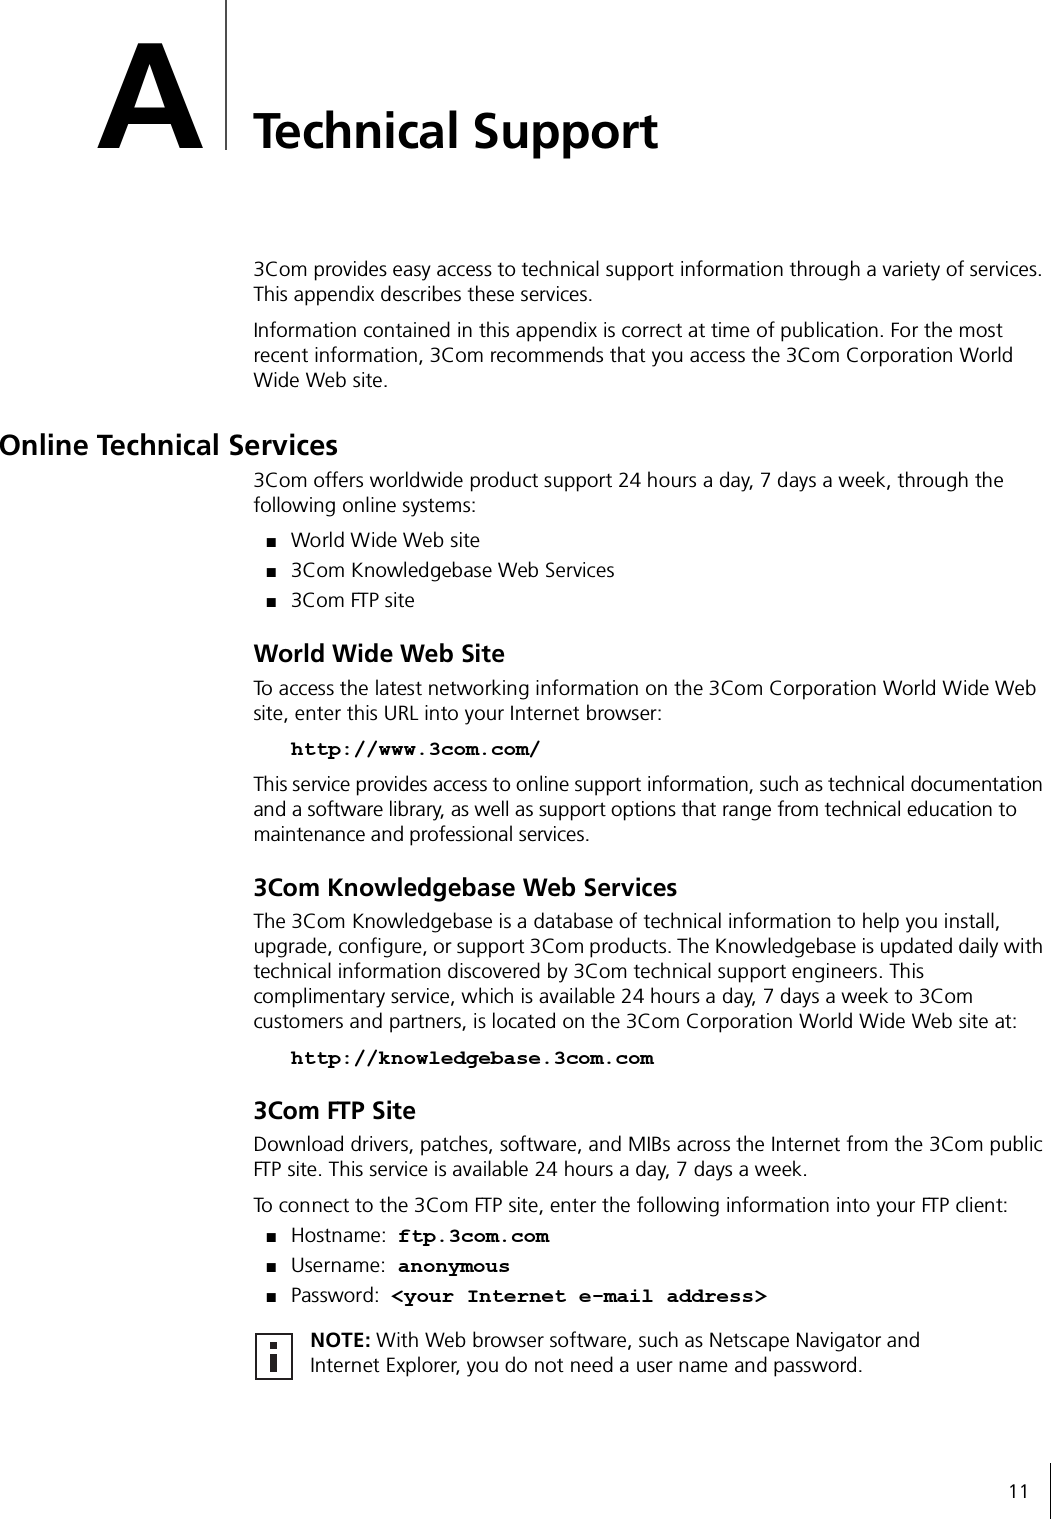 11ATechnical Support3Com provides easy access to technical support information through a variety of services. This appendix describes these services.Information contained in this appendix is correct at time of publication. For the most recent information, 3Com recommends that you access the 3Com Corporation World Wide Web site.Online Technical Services3Com offers worldwide product support 24 hours a day, 7 days a week, through the following online systems:■World Wide Web site■3Com Knowledgebase Web Services■3Com FTP siteWorld Wide Web SiteTo access the latest networking information on the 3Com Corporation World Wide Web site, enter this URL into your Internet browser:http://www.3com.com/This service provides access to online support information, such as technical documentation and a software library, as well as support options that range from technical education to maintenance and professional services.3Com Knowledgebase Web ServicesThe 3Com Knowledgebase is a database of technical information to help you install, upgrade, configure, or support 3Com products. The Knowledgebase is updated daily with technical information discovered by 3Com technical support engineers. This complimentary service, which is available 24 hours a day, 7 days a week to 3Com customers and partners, is located on the 3Com Corporation World Wide Web site at:http://knowledgebase.3com.com3Com FTP SiteDownload drivers, patches, software, and MIBs across the Internet from the 3Com public FTP site. This service is available 24 hours a day, 7 days a week.To connect to the 3Com FTP site, enter the following information into your FTP client:■Hostname: ftp.3com.com■Username: anonymous■Password: &lt;your Internet e-mail address&gt;NOTE: With Web browser software, such as Netscape Navigator and Internet Explorer, you do not need a user name and password.